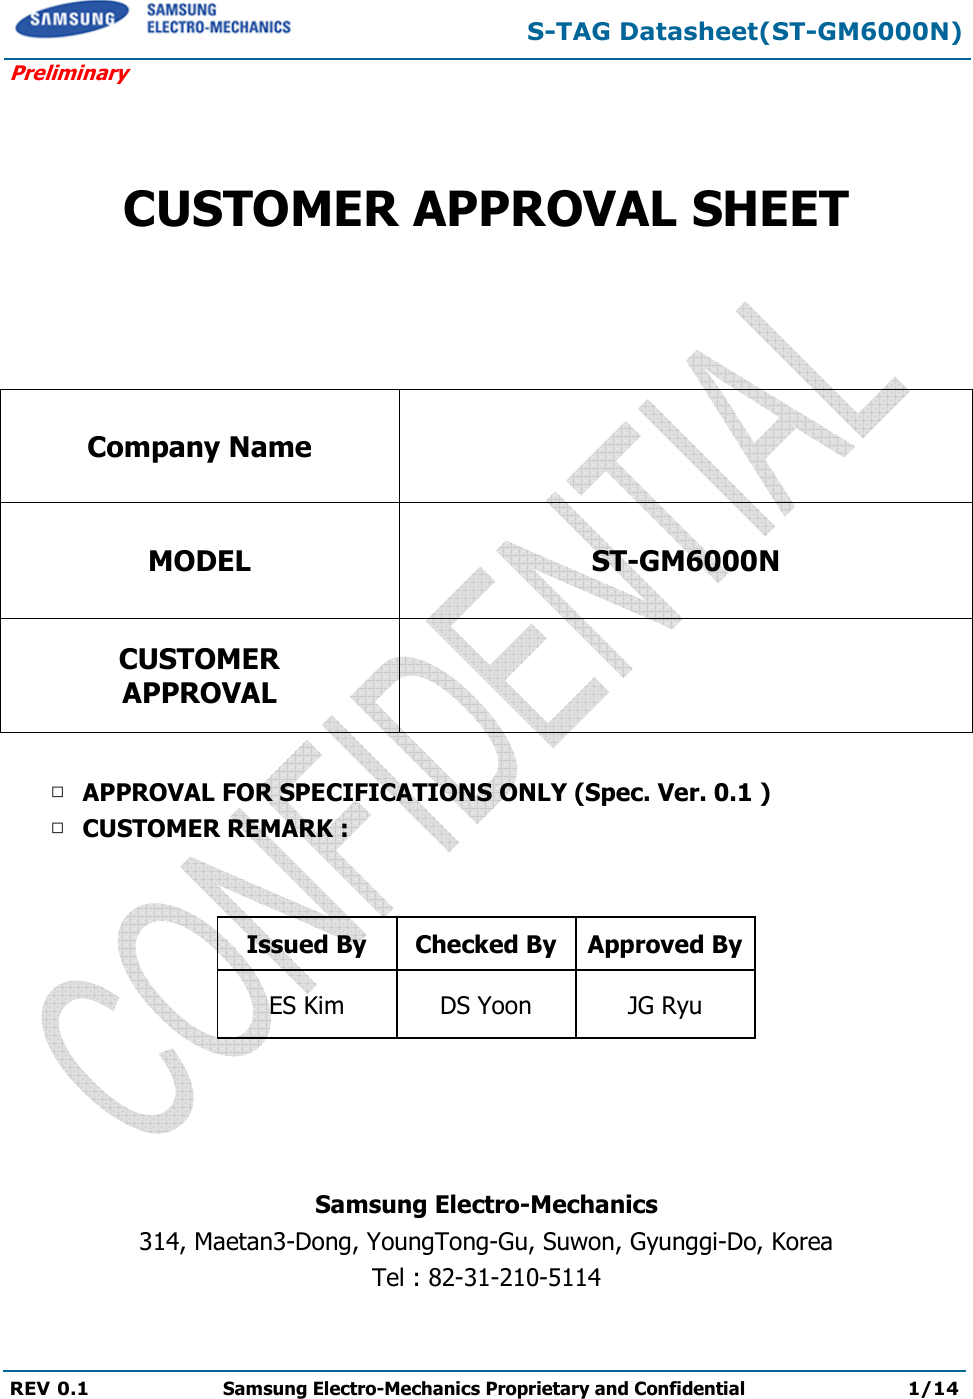  S-TAG Datasheet(ST-GM6000N) Preliminary REV 0.1  Samsung Electro-Mechanics Proprietary and Confidential 1/14     CUSTOMER APPROVAL SHEET   Company Name  MODEL ST-GM6000N CUSTOMER APPROVAL   □ APPROVAL FOR SPECIFICATIONS ONLY (Spec. Ver. 0.1 ) □ CUSTOMER REMARK :    Issued By  Checked By Approved By ES Kim  DS Yoon  JG Ryu     Samsung Electro-Mechanics 314, Maetan3-Dong, YoungTong-Gu, Suwon, Gyunggi-Do, Korea Tel : 82-31-210-5114